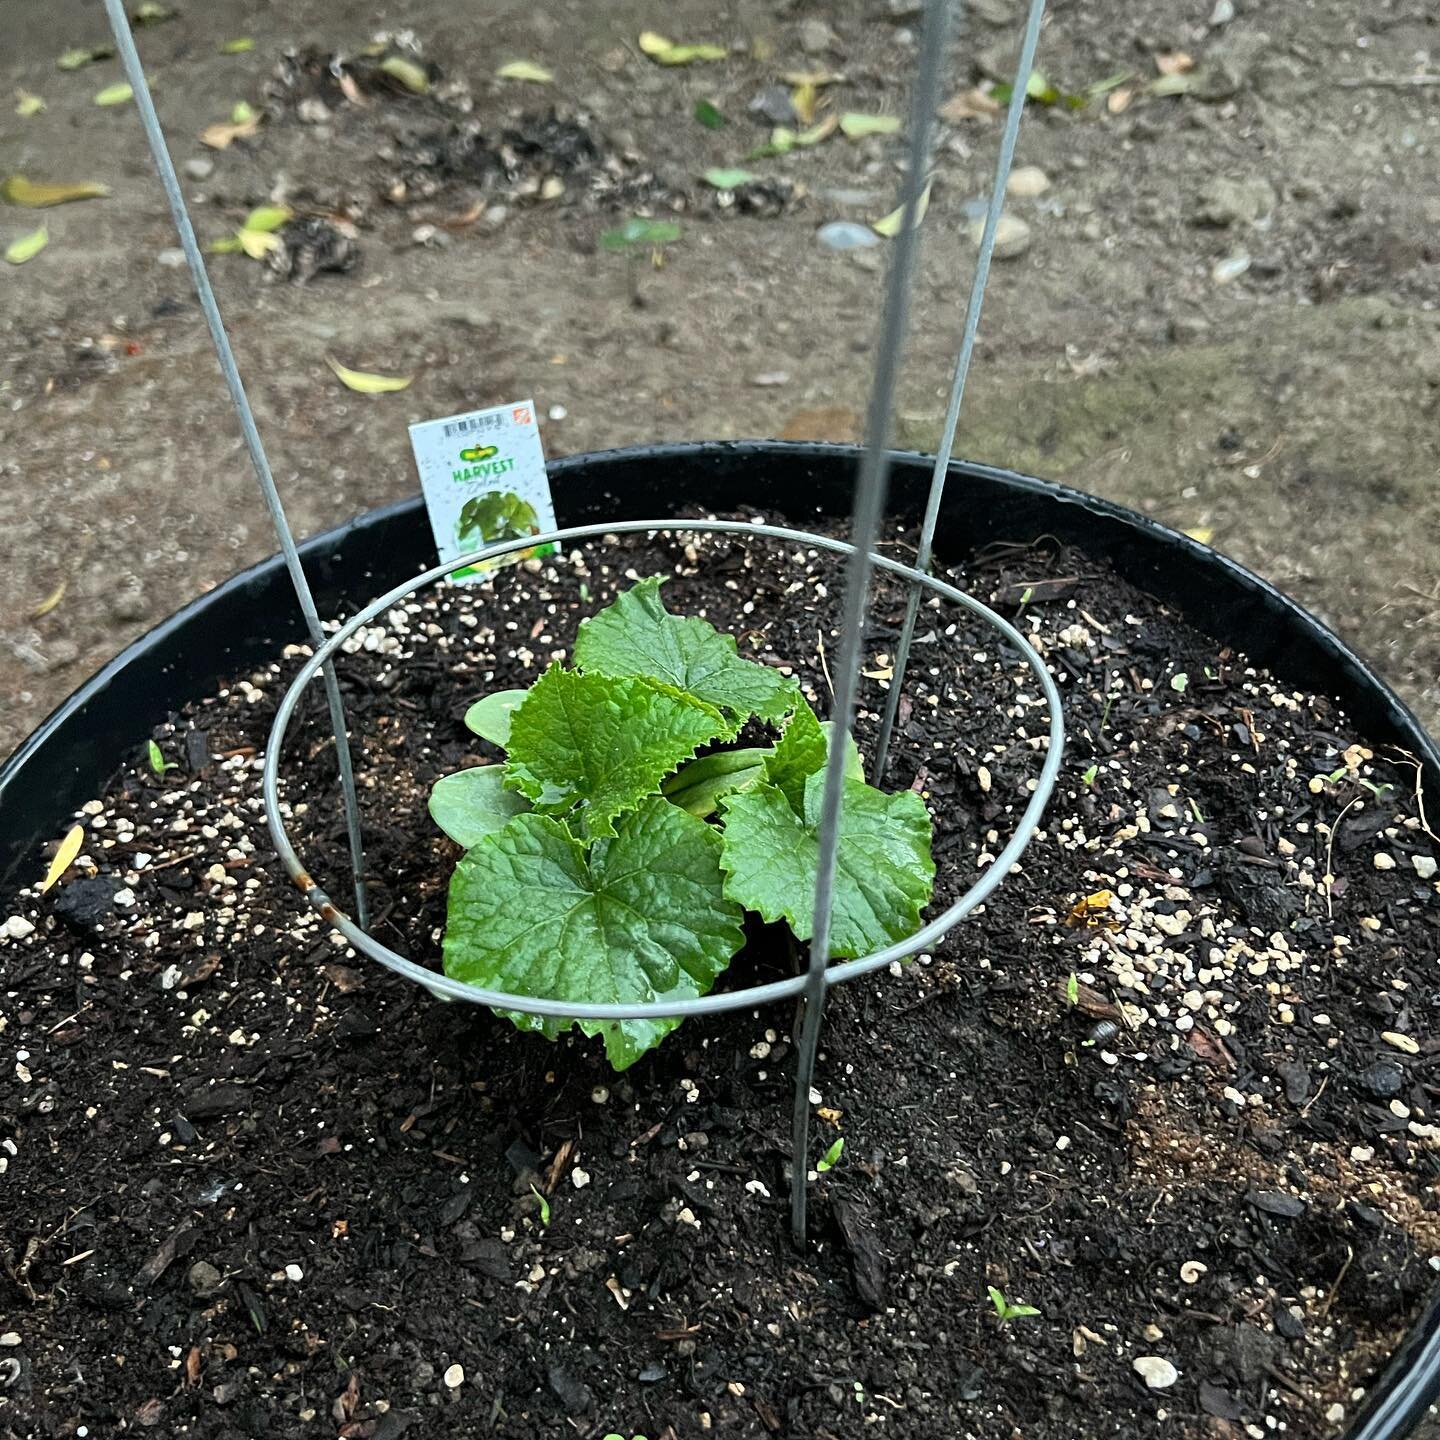 Week 3 Updates:

the tomato plants are thriving. The zucchini plant is really sprouting up. I may want to plant another jalape&ntilde;o or cayenne plant. 

#garden #plantlover #tomato #jalapeno #pepper #california #lawyer #attorney